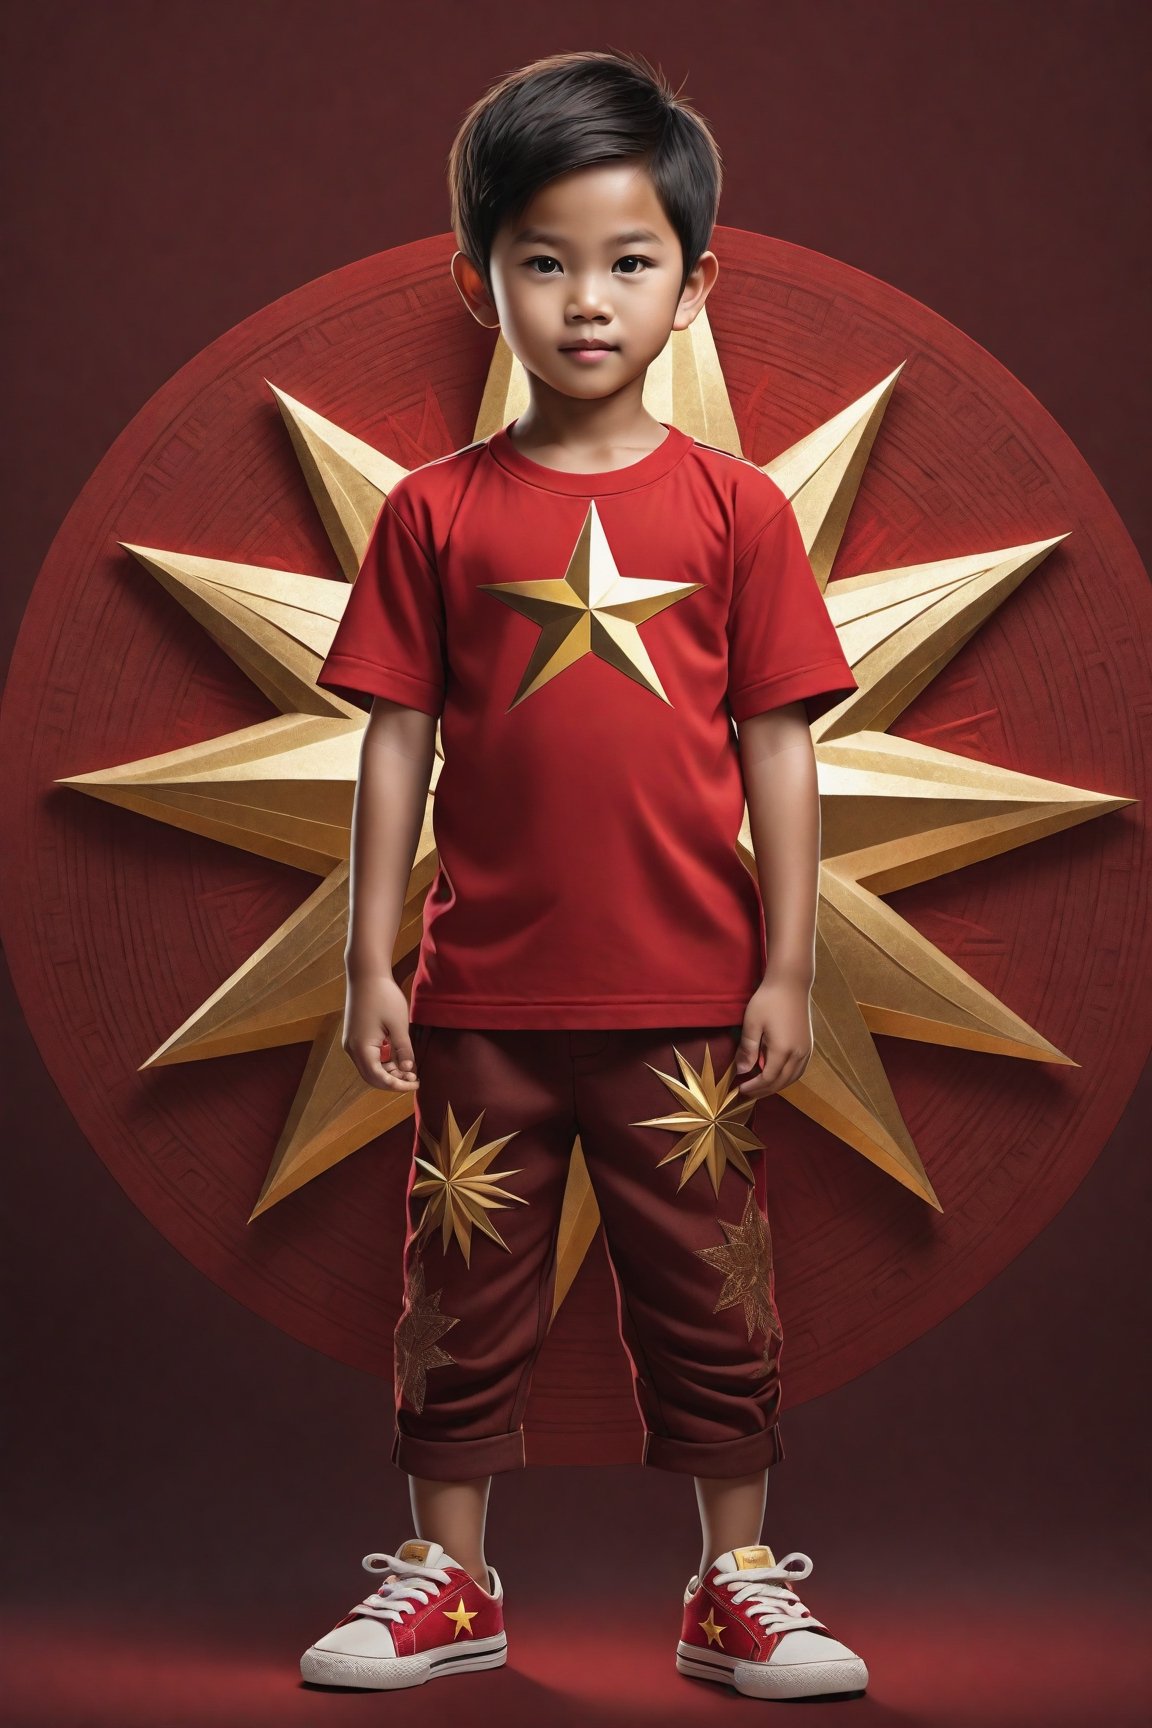 ((full body)) body_marking, highly detailed shot tribal version character of cute Vietnamese boy kid in Red shirt has a big golden star, masterpiece artwork, white accent, detailed face features, subtle gradients, extremely detailed, photorealistic, 8k, centered, perfect symmetrical, studio photography, muted color scheme, made with adobe illustrator, solid dark background 